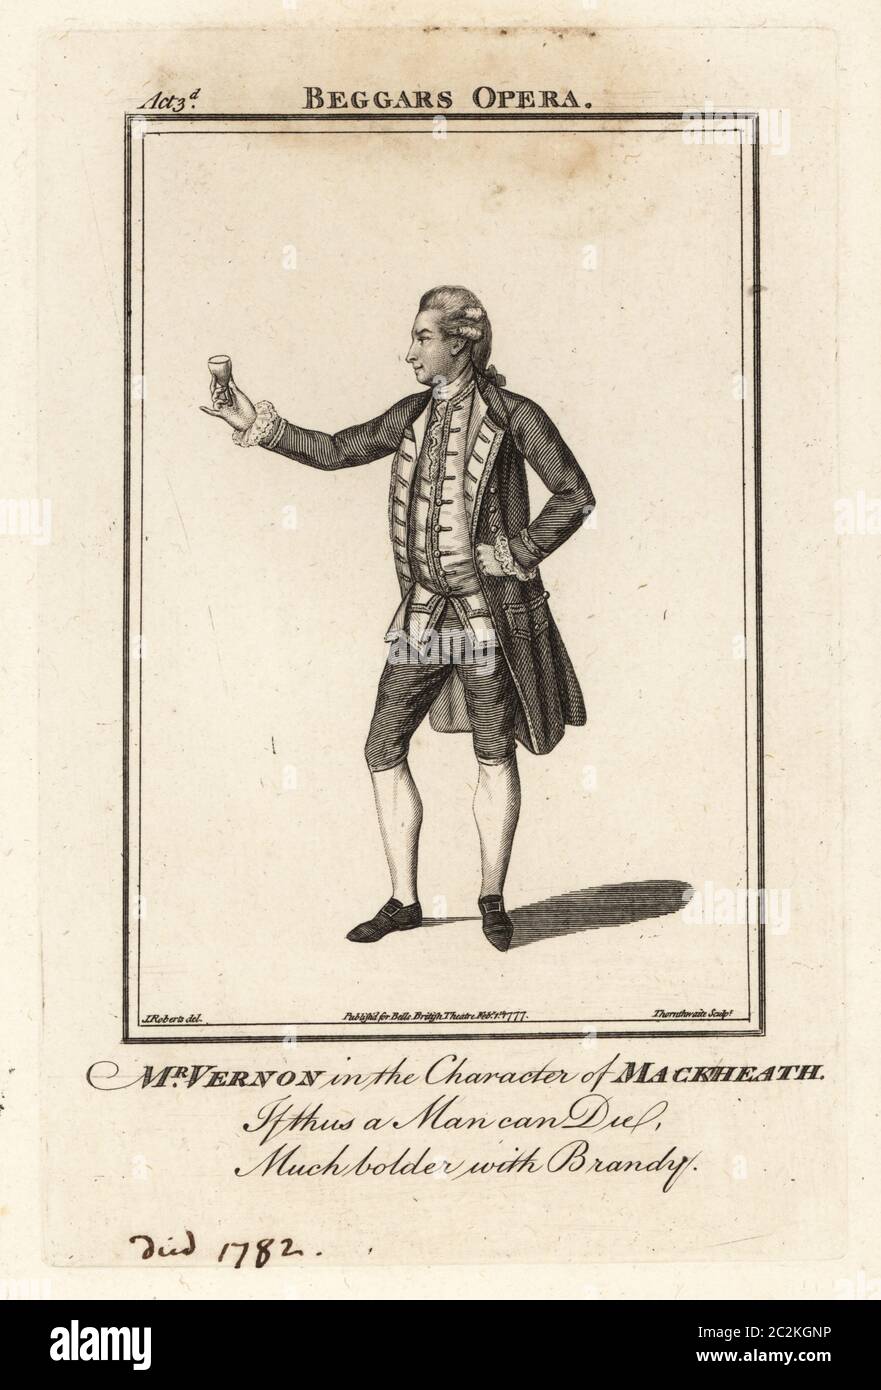 Mr. Joseph Vernon in the character of Mackheath in John Gay’s The Beggar’s Opera, Drury Lane Theatre, 1762. Copperplate engraving by J. Thornthwaite after an illustration by James Roberts from Bell’s British Theatre, Consisting of the most esteemed English Plays, John Bell, London, 1777. Stock Photo